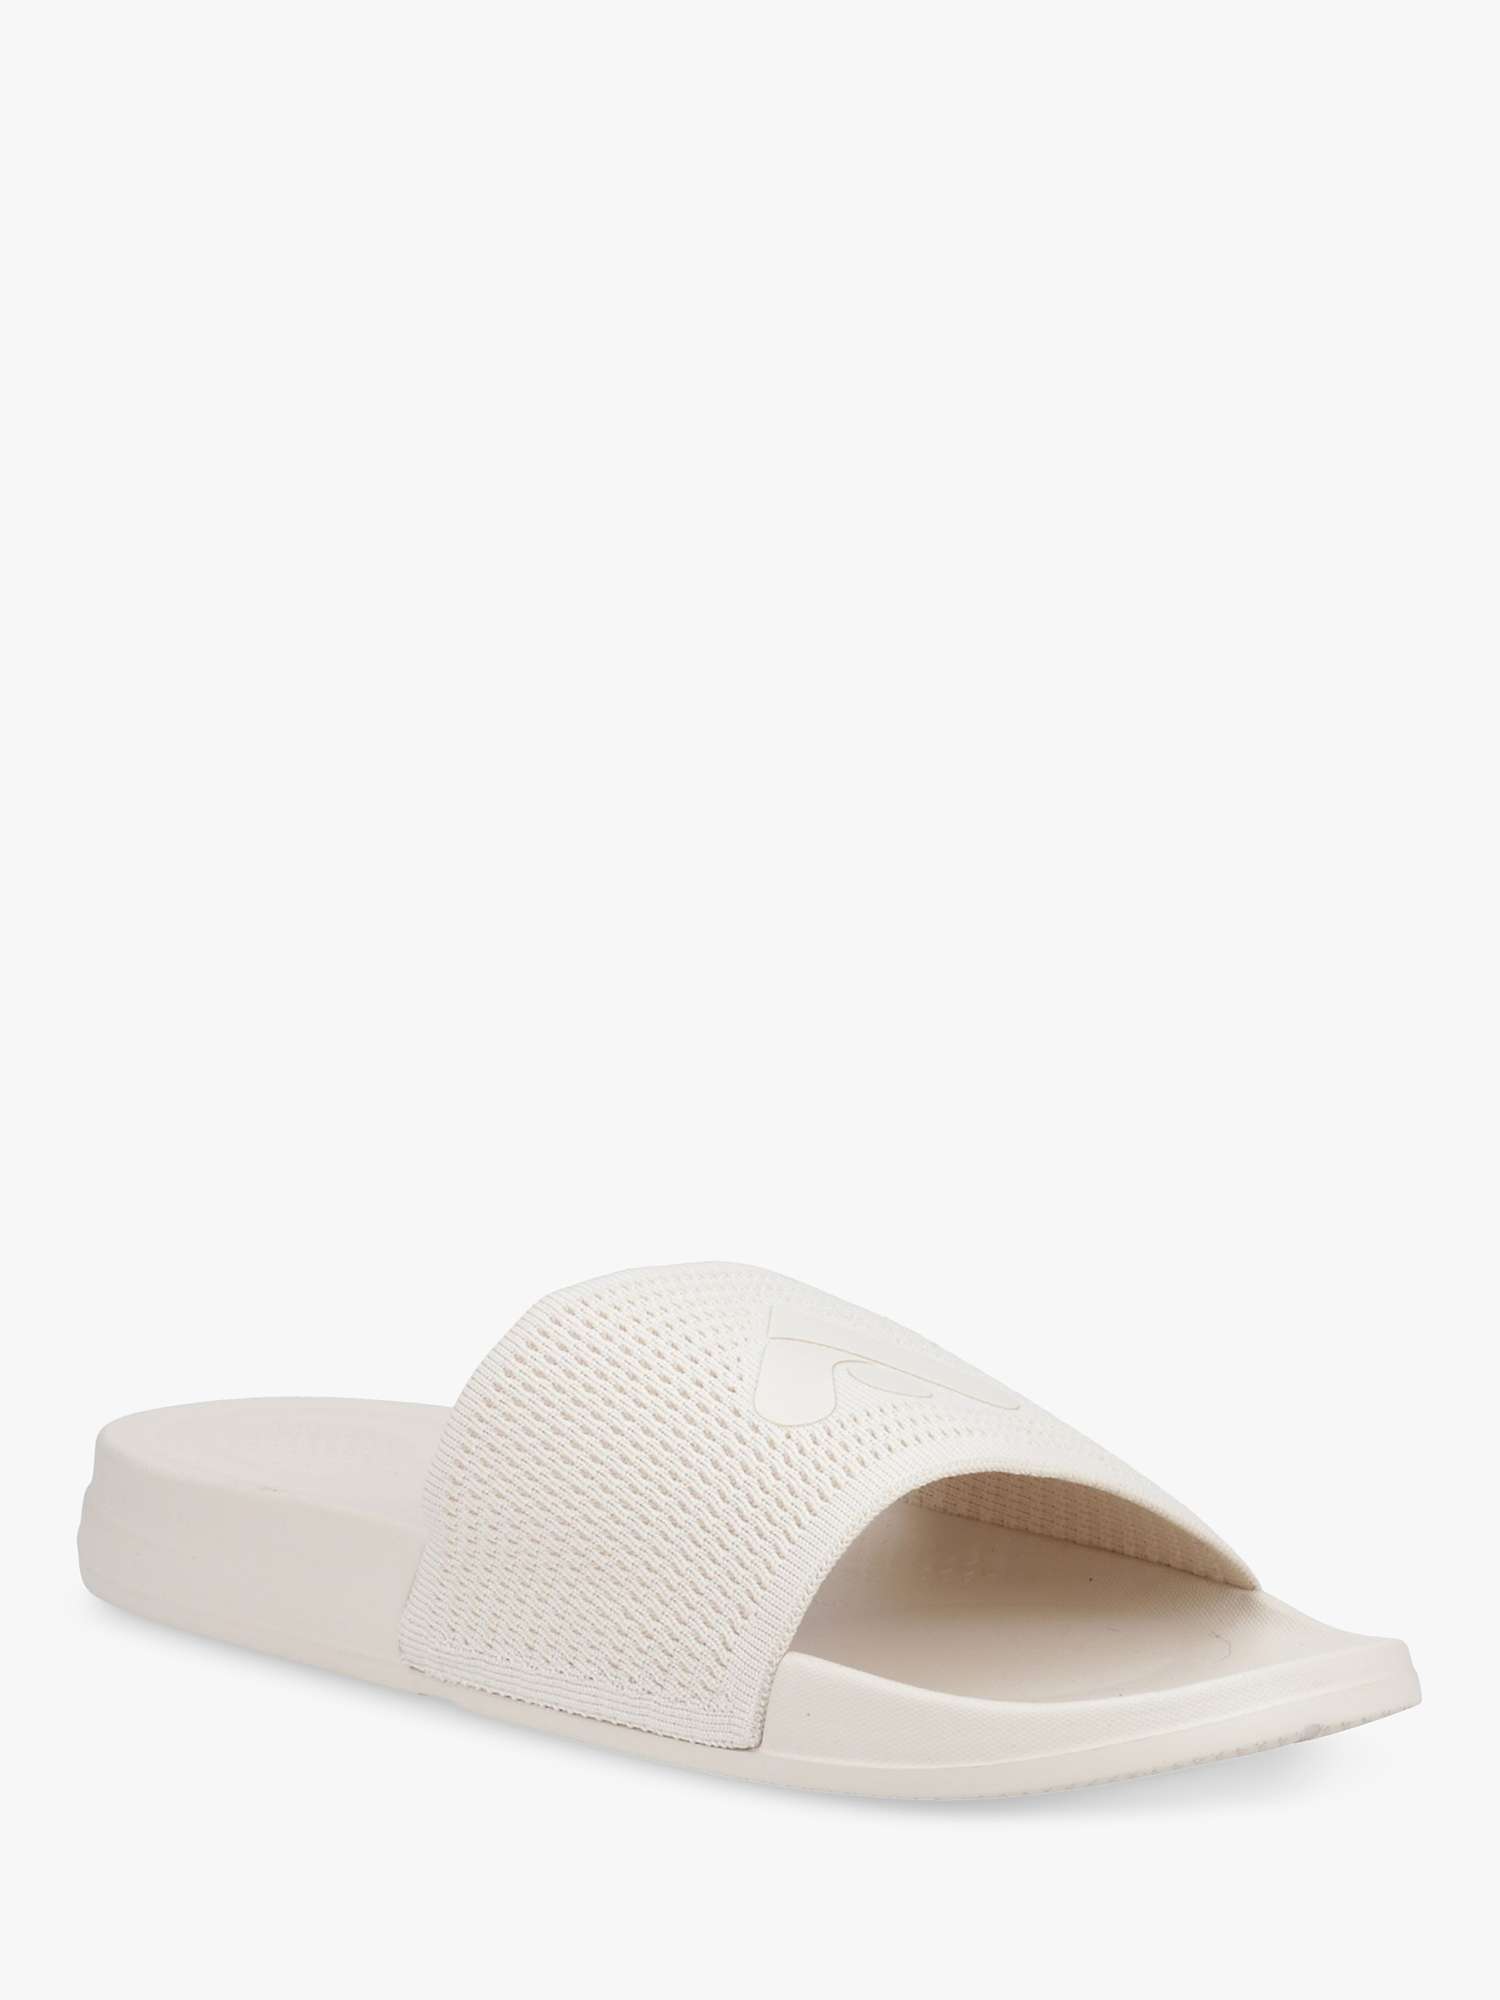 Buy FitFlop iQushion Arrow Sliders Online at johnlewis.com